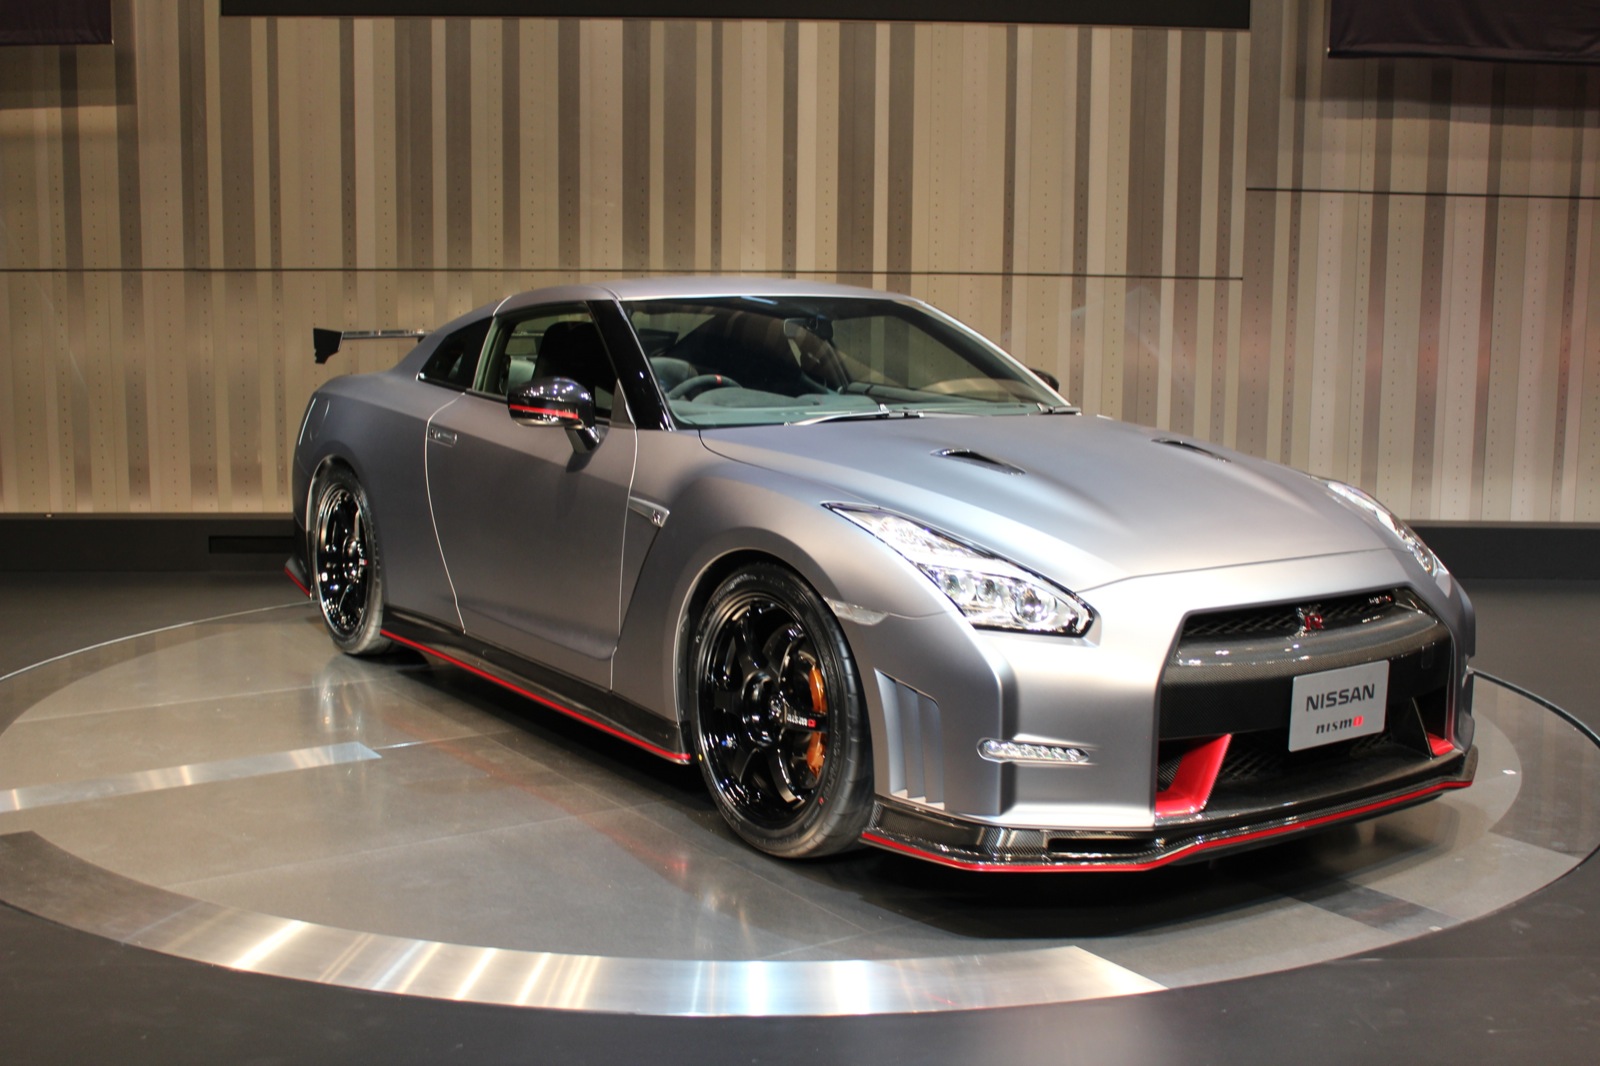 2015-nissan-gt-r-nismo--tokyo-motor-show-preview-event-nissan-global-headquarters_100446457_h